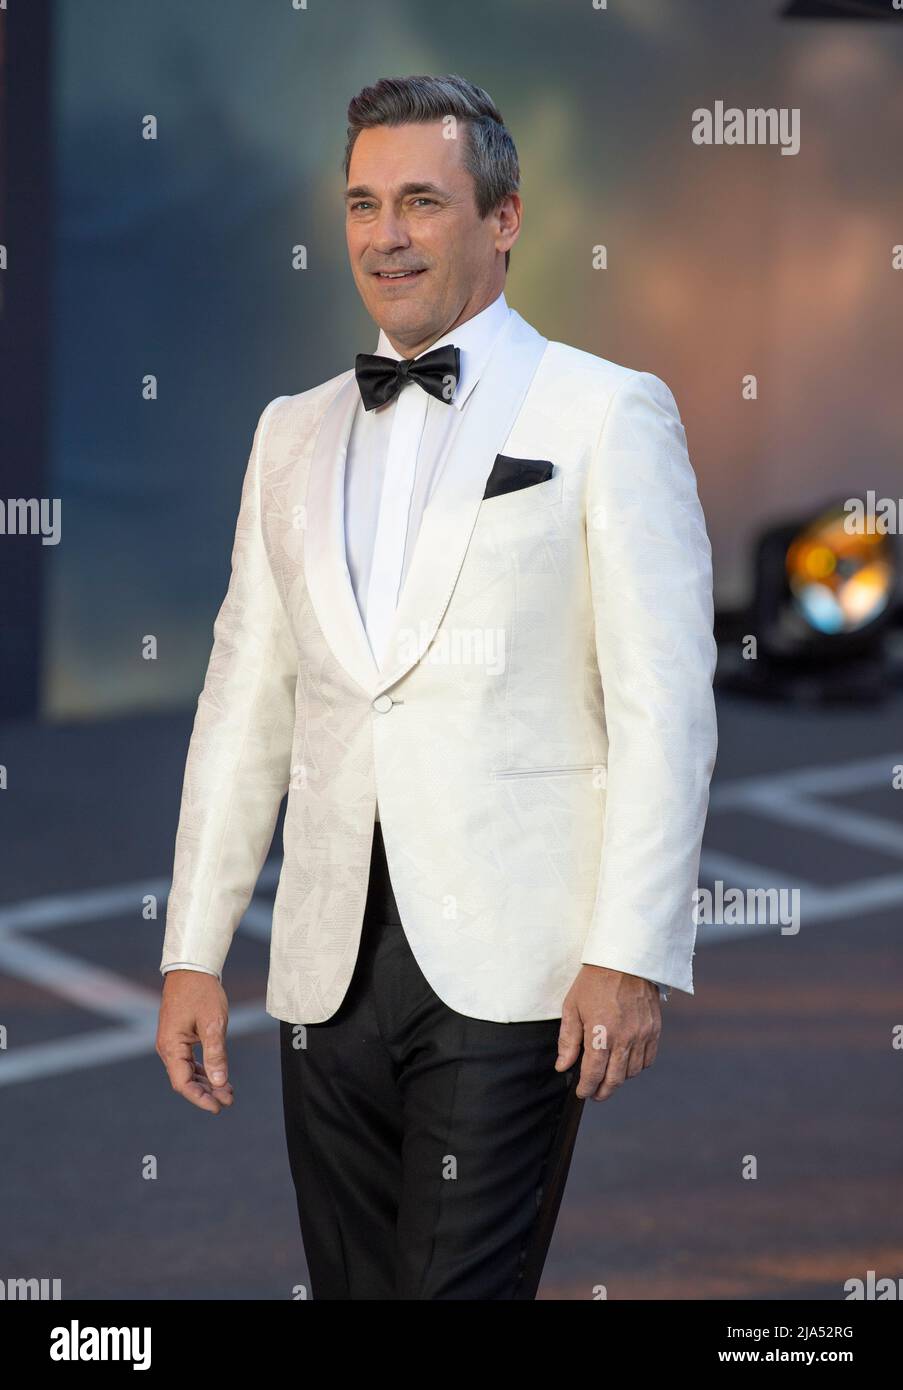 Jon Hamm attends 'Top Gun: Maverick' Royal Film Performance at Leicester Square on May 19, 2022 in London, England. Stock Photo